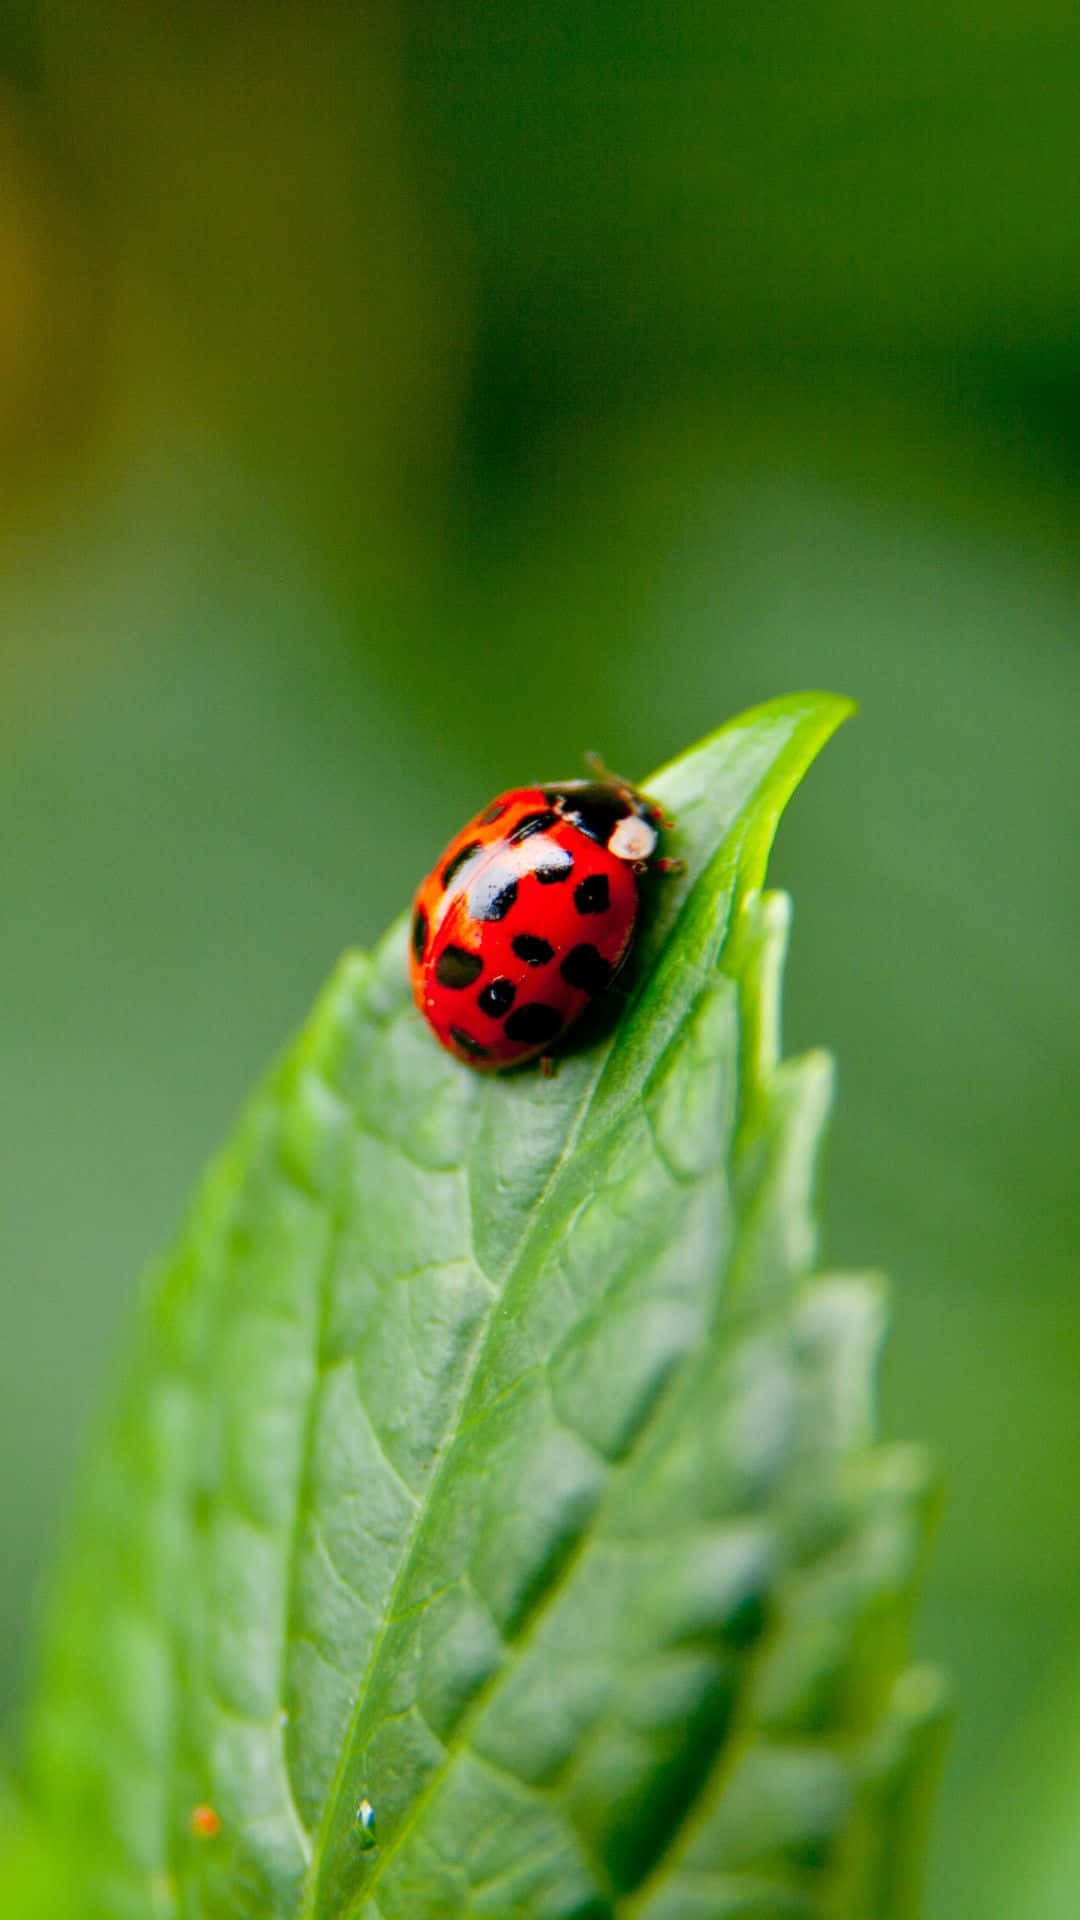 A vibrant, red ladybug perched atop a bright green leaf.